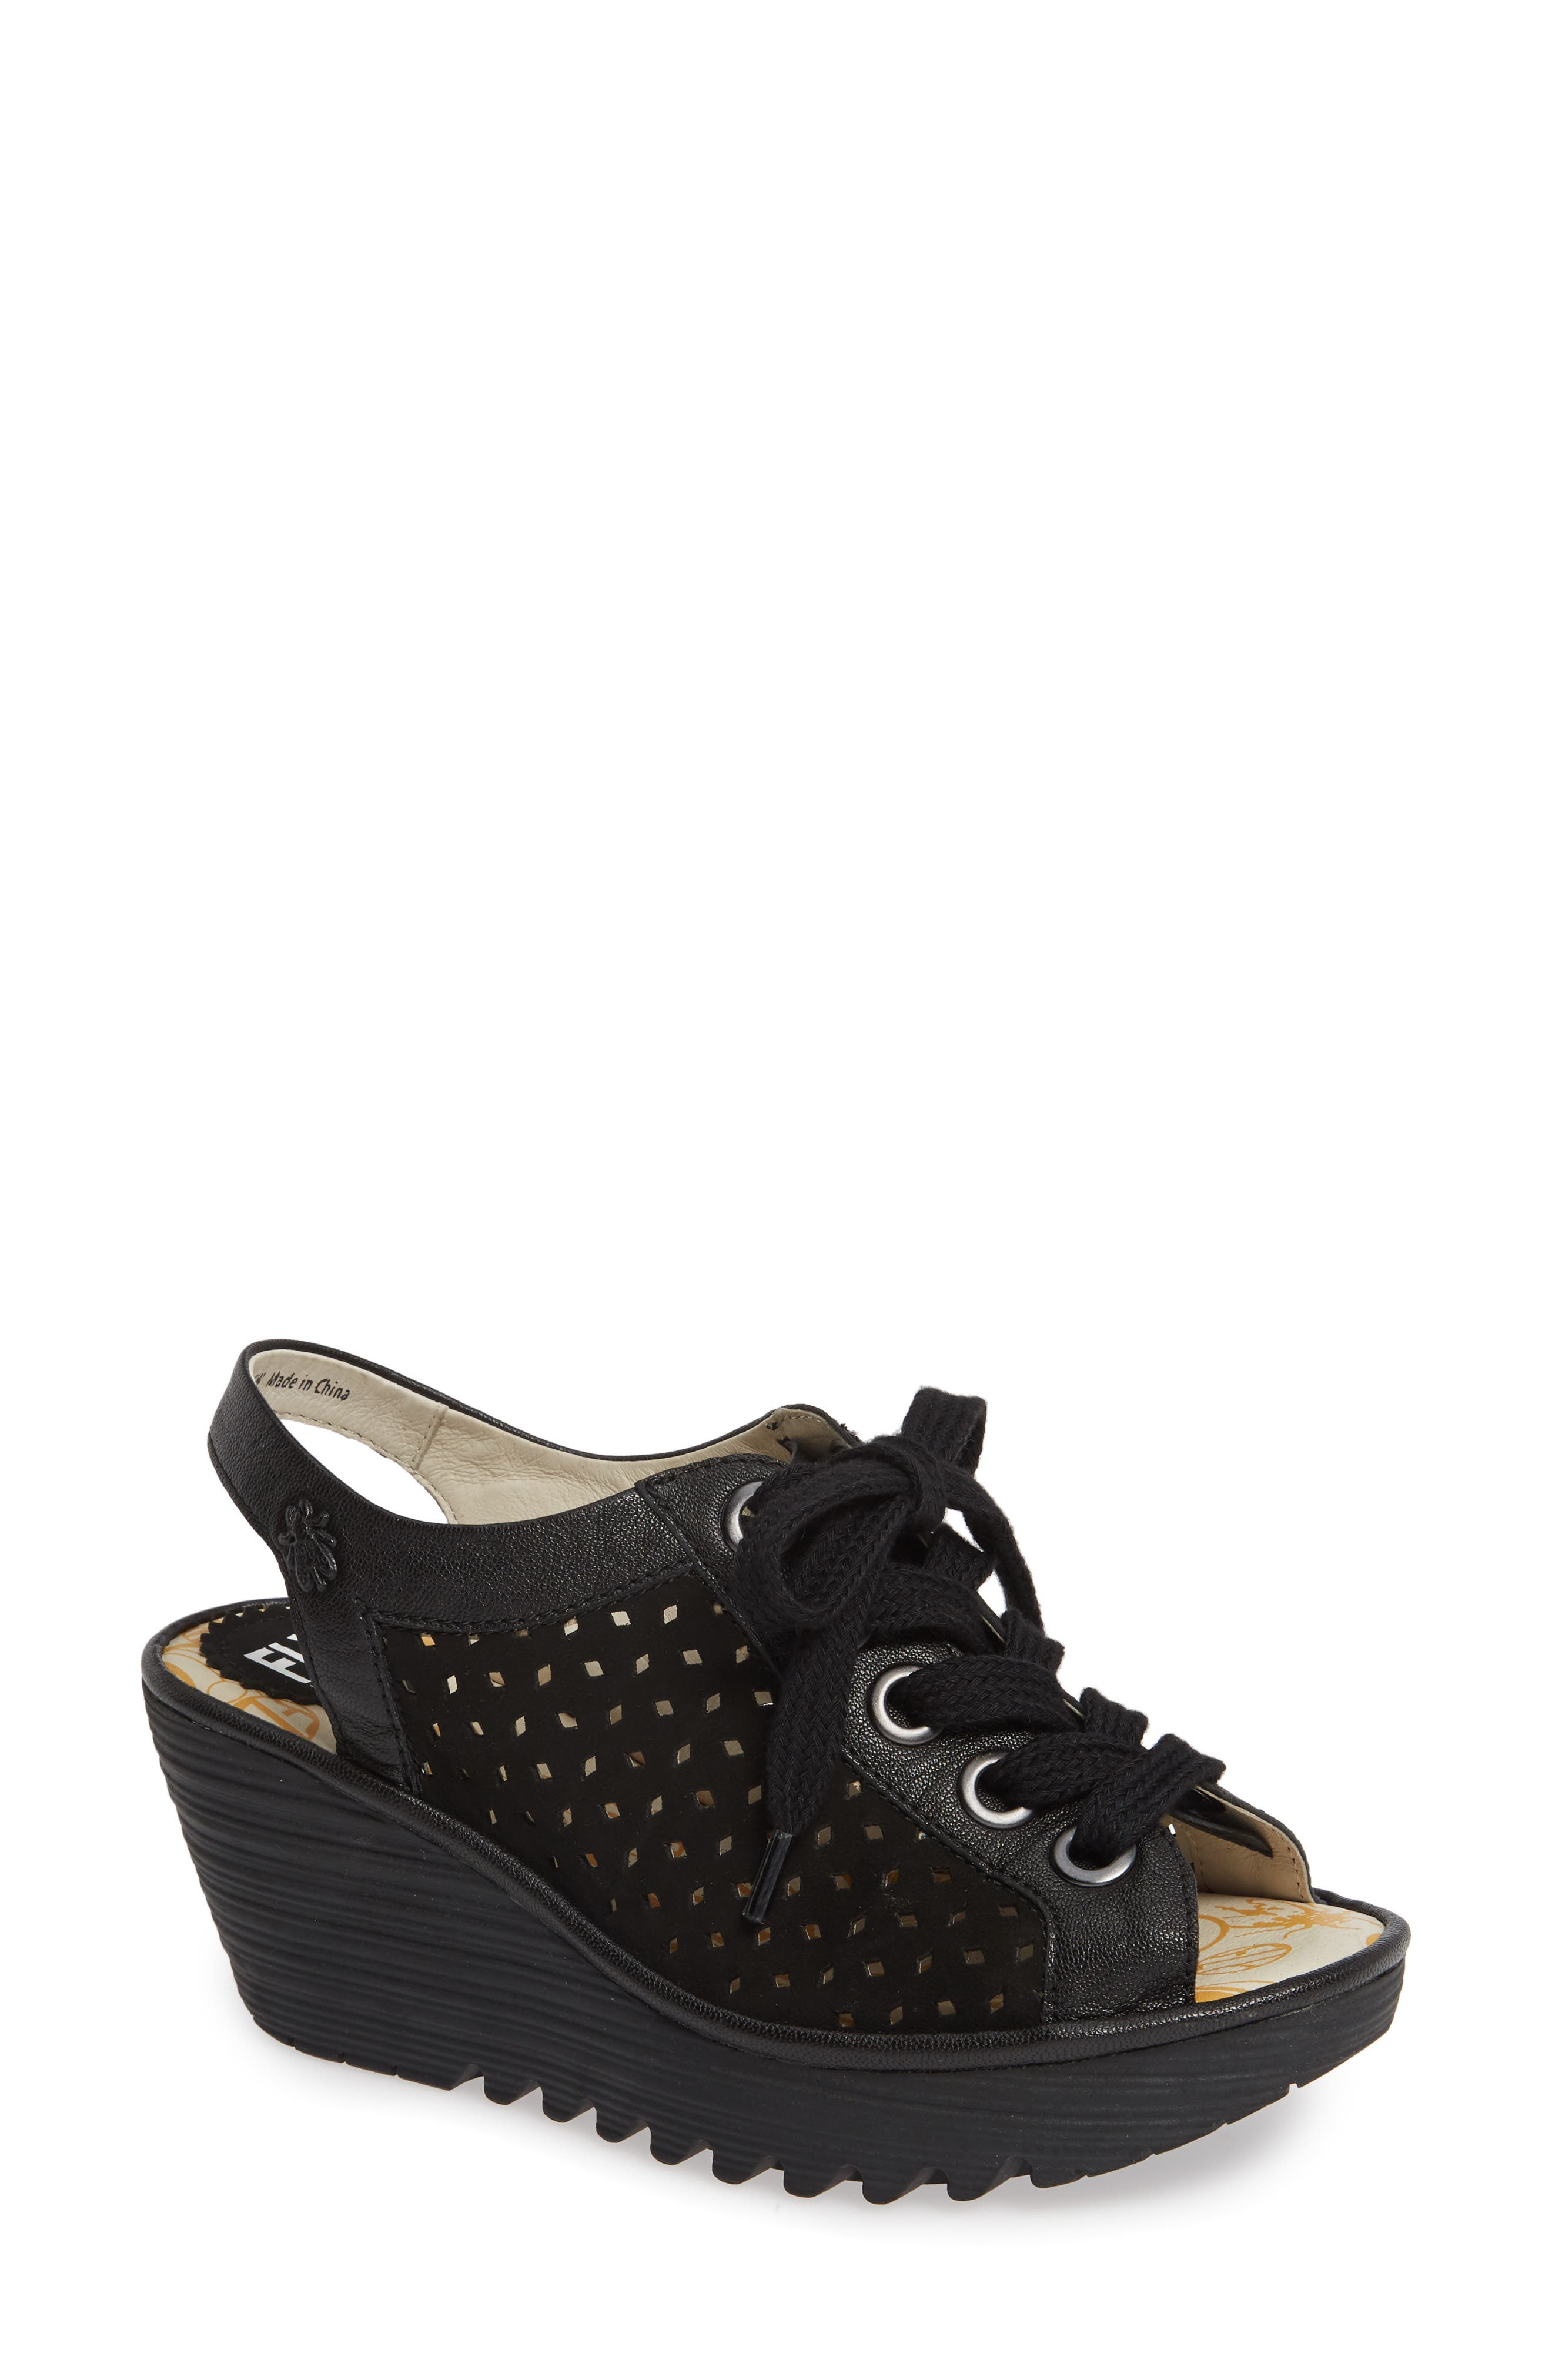 fly london wedges